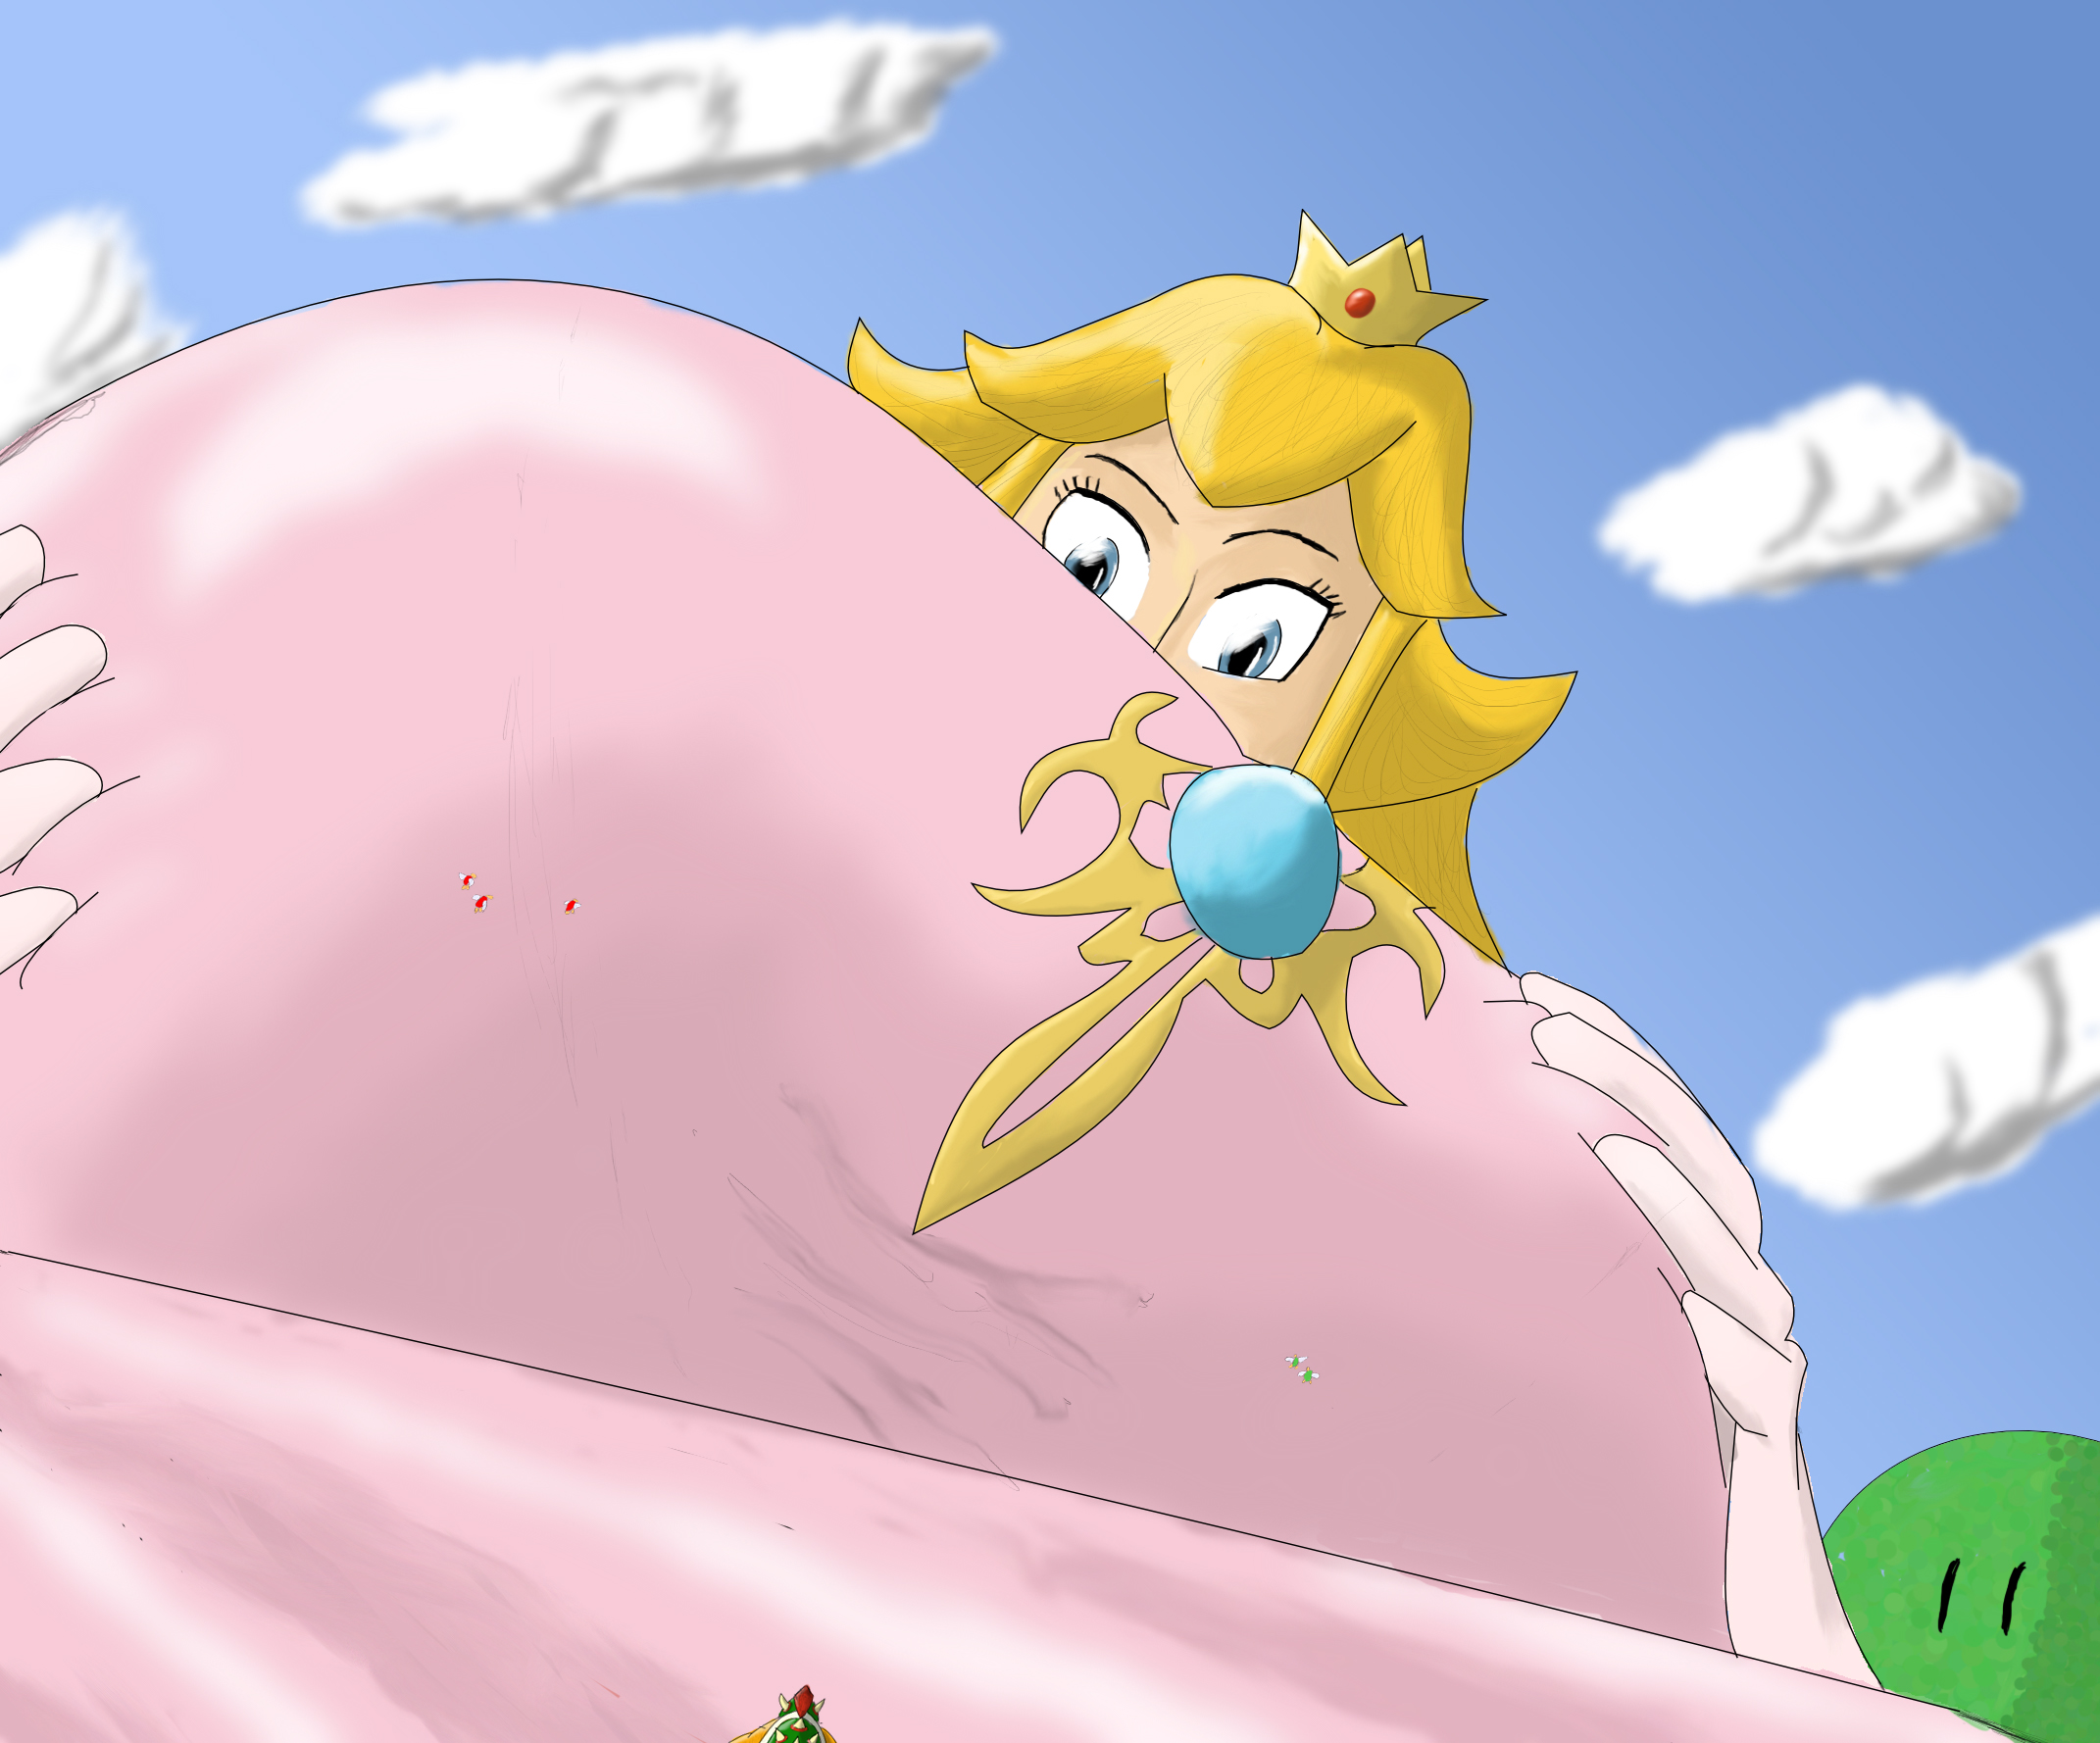 Bowser and the giant Peach.